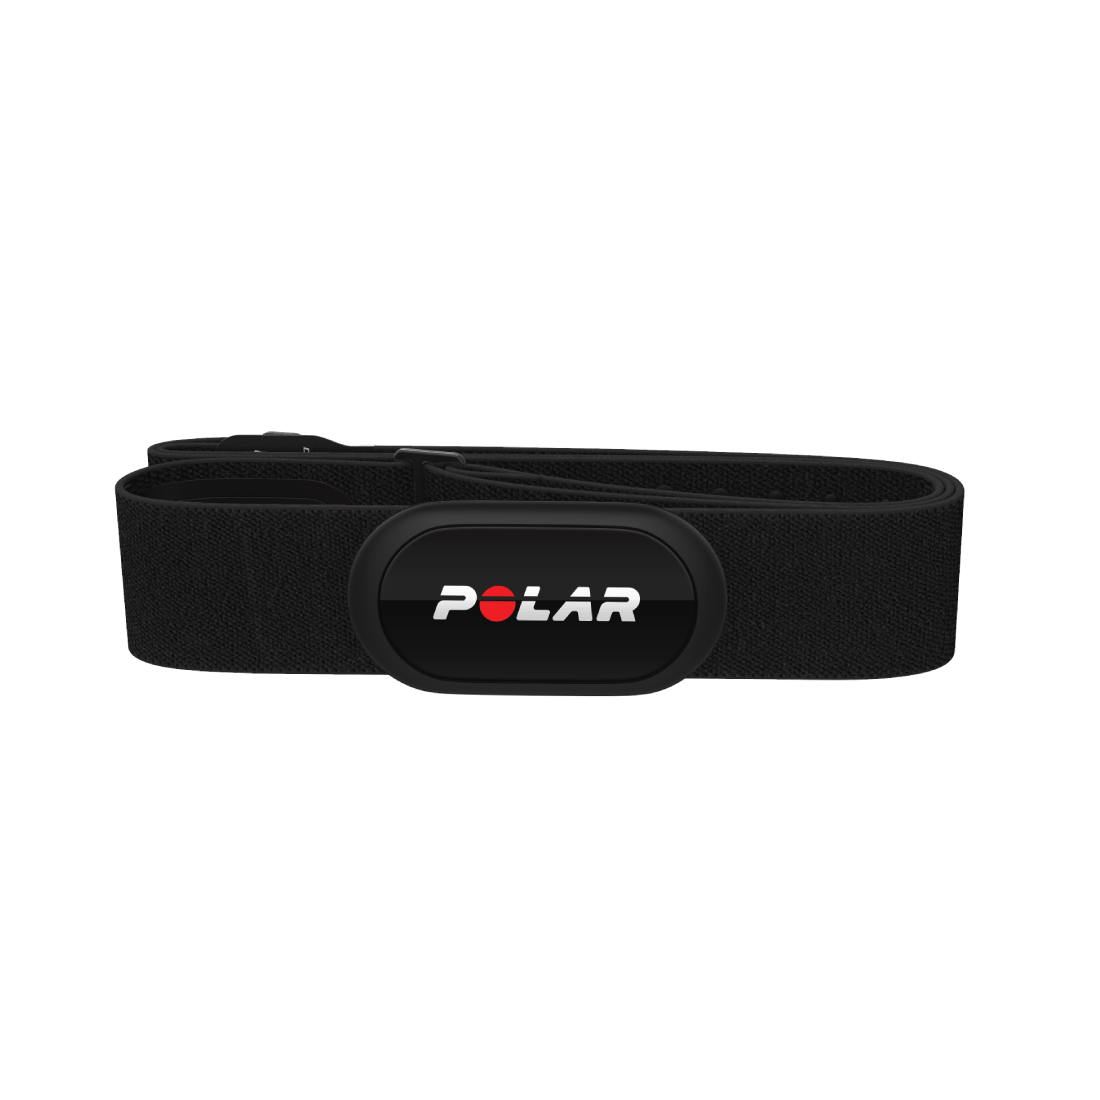 Polar H10 Heart Rate Monitor Chest Strap - ANT + Bluetooth, Waterproof HR Sensor for Men and Women - Athletix.ae